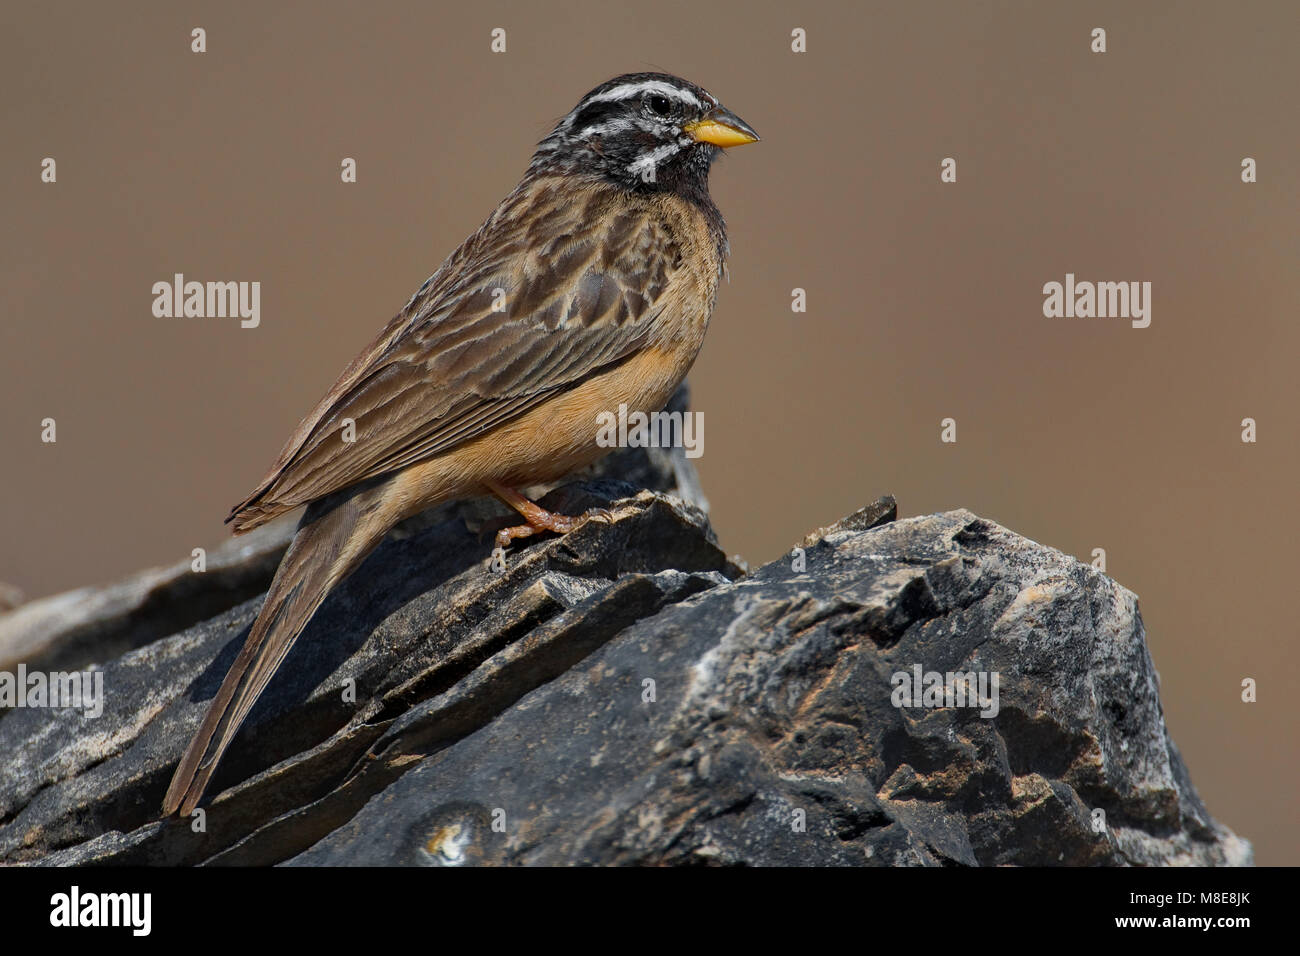 Berggors zittend op rots; Cinnamon-breasted Bunting perched on a rock Stock Photo